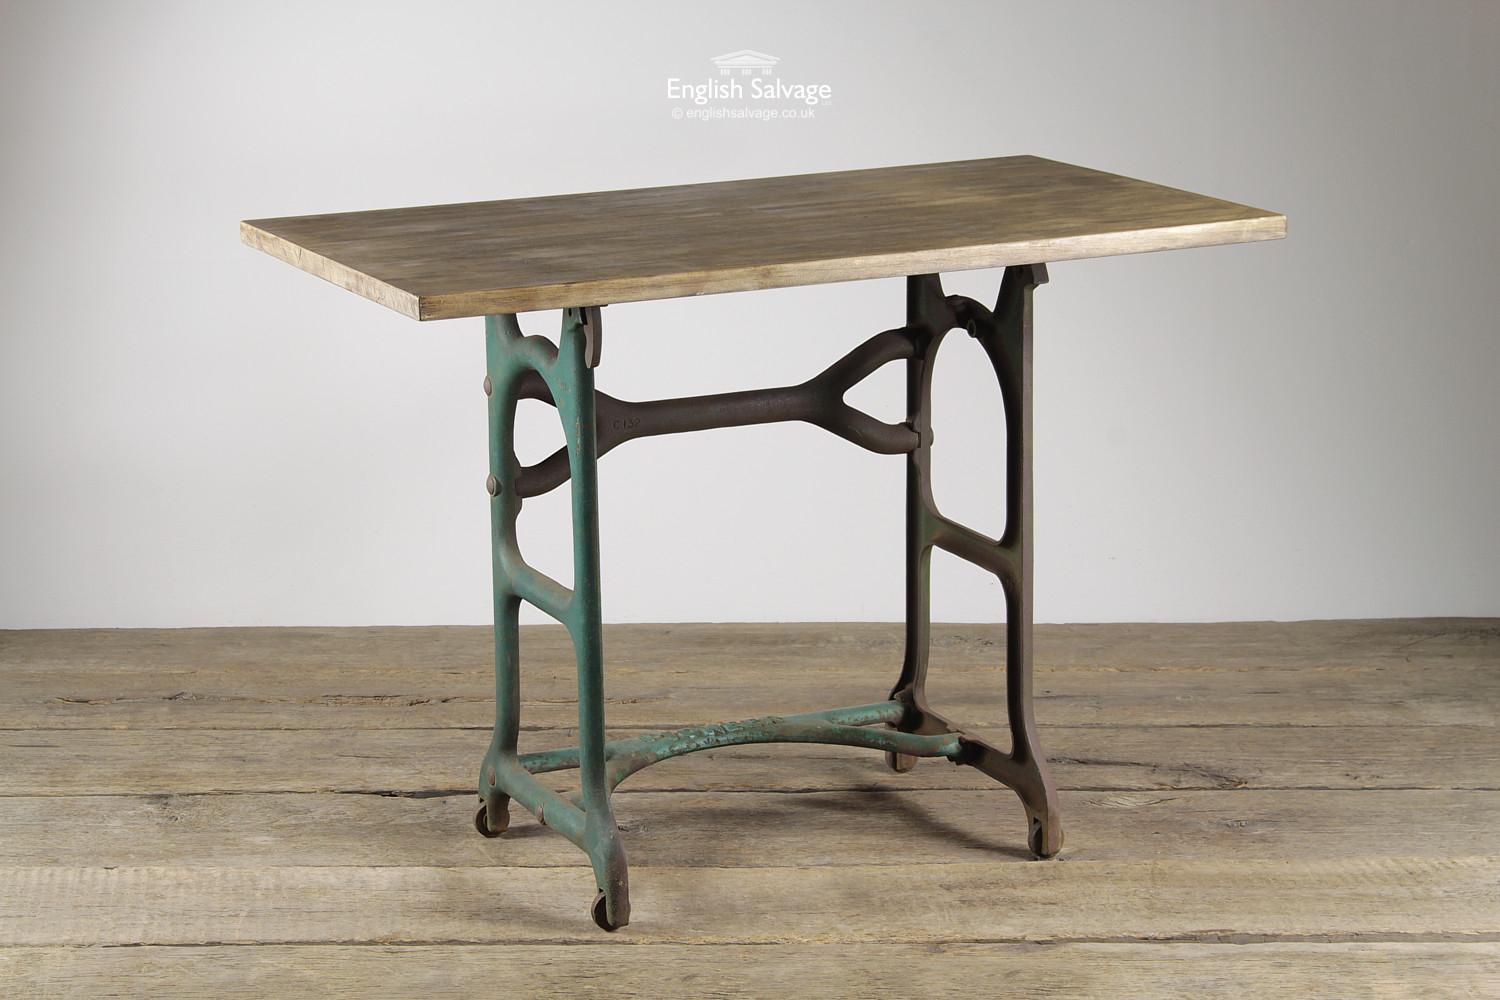 European Salvaged Industrial Base Wheeled Wooden Table, 20th Century For Sale